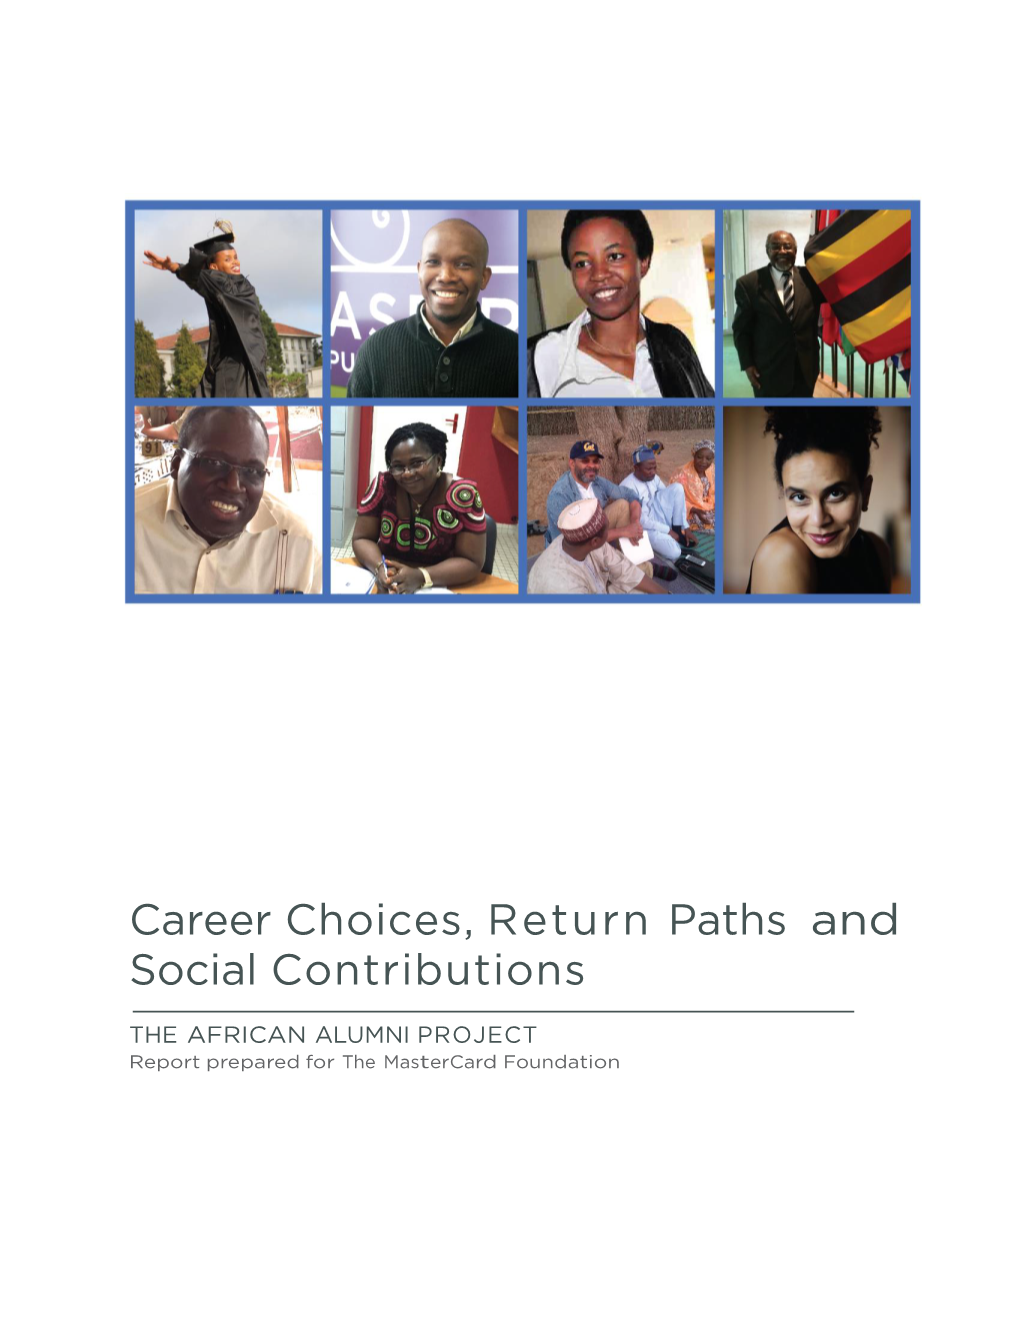 Career Choices, Return Paths and Social Contributions